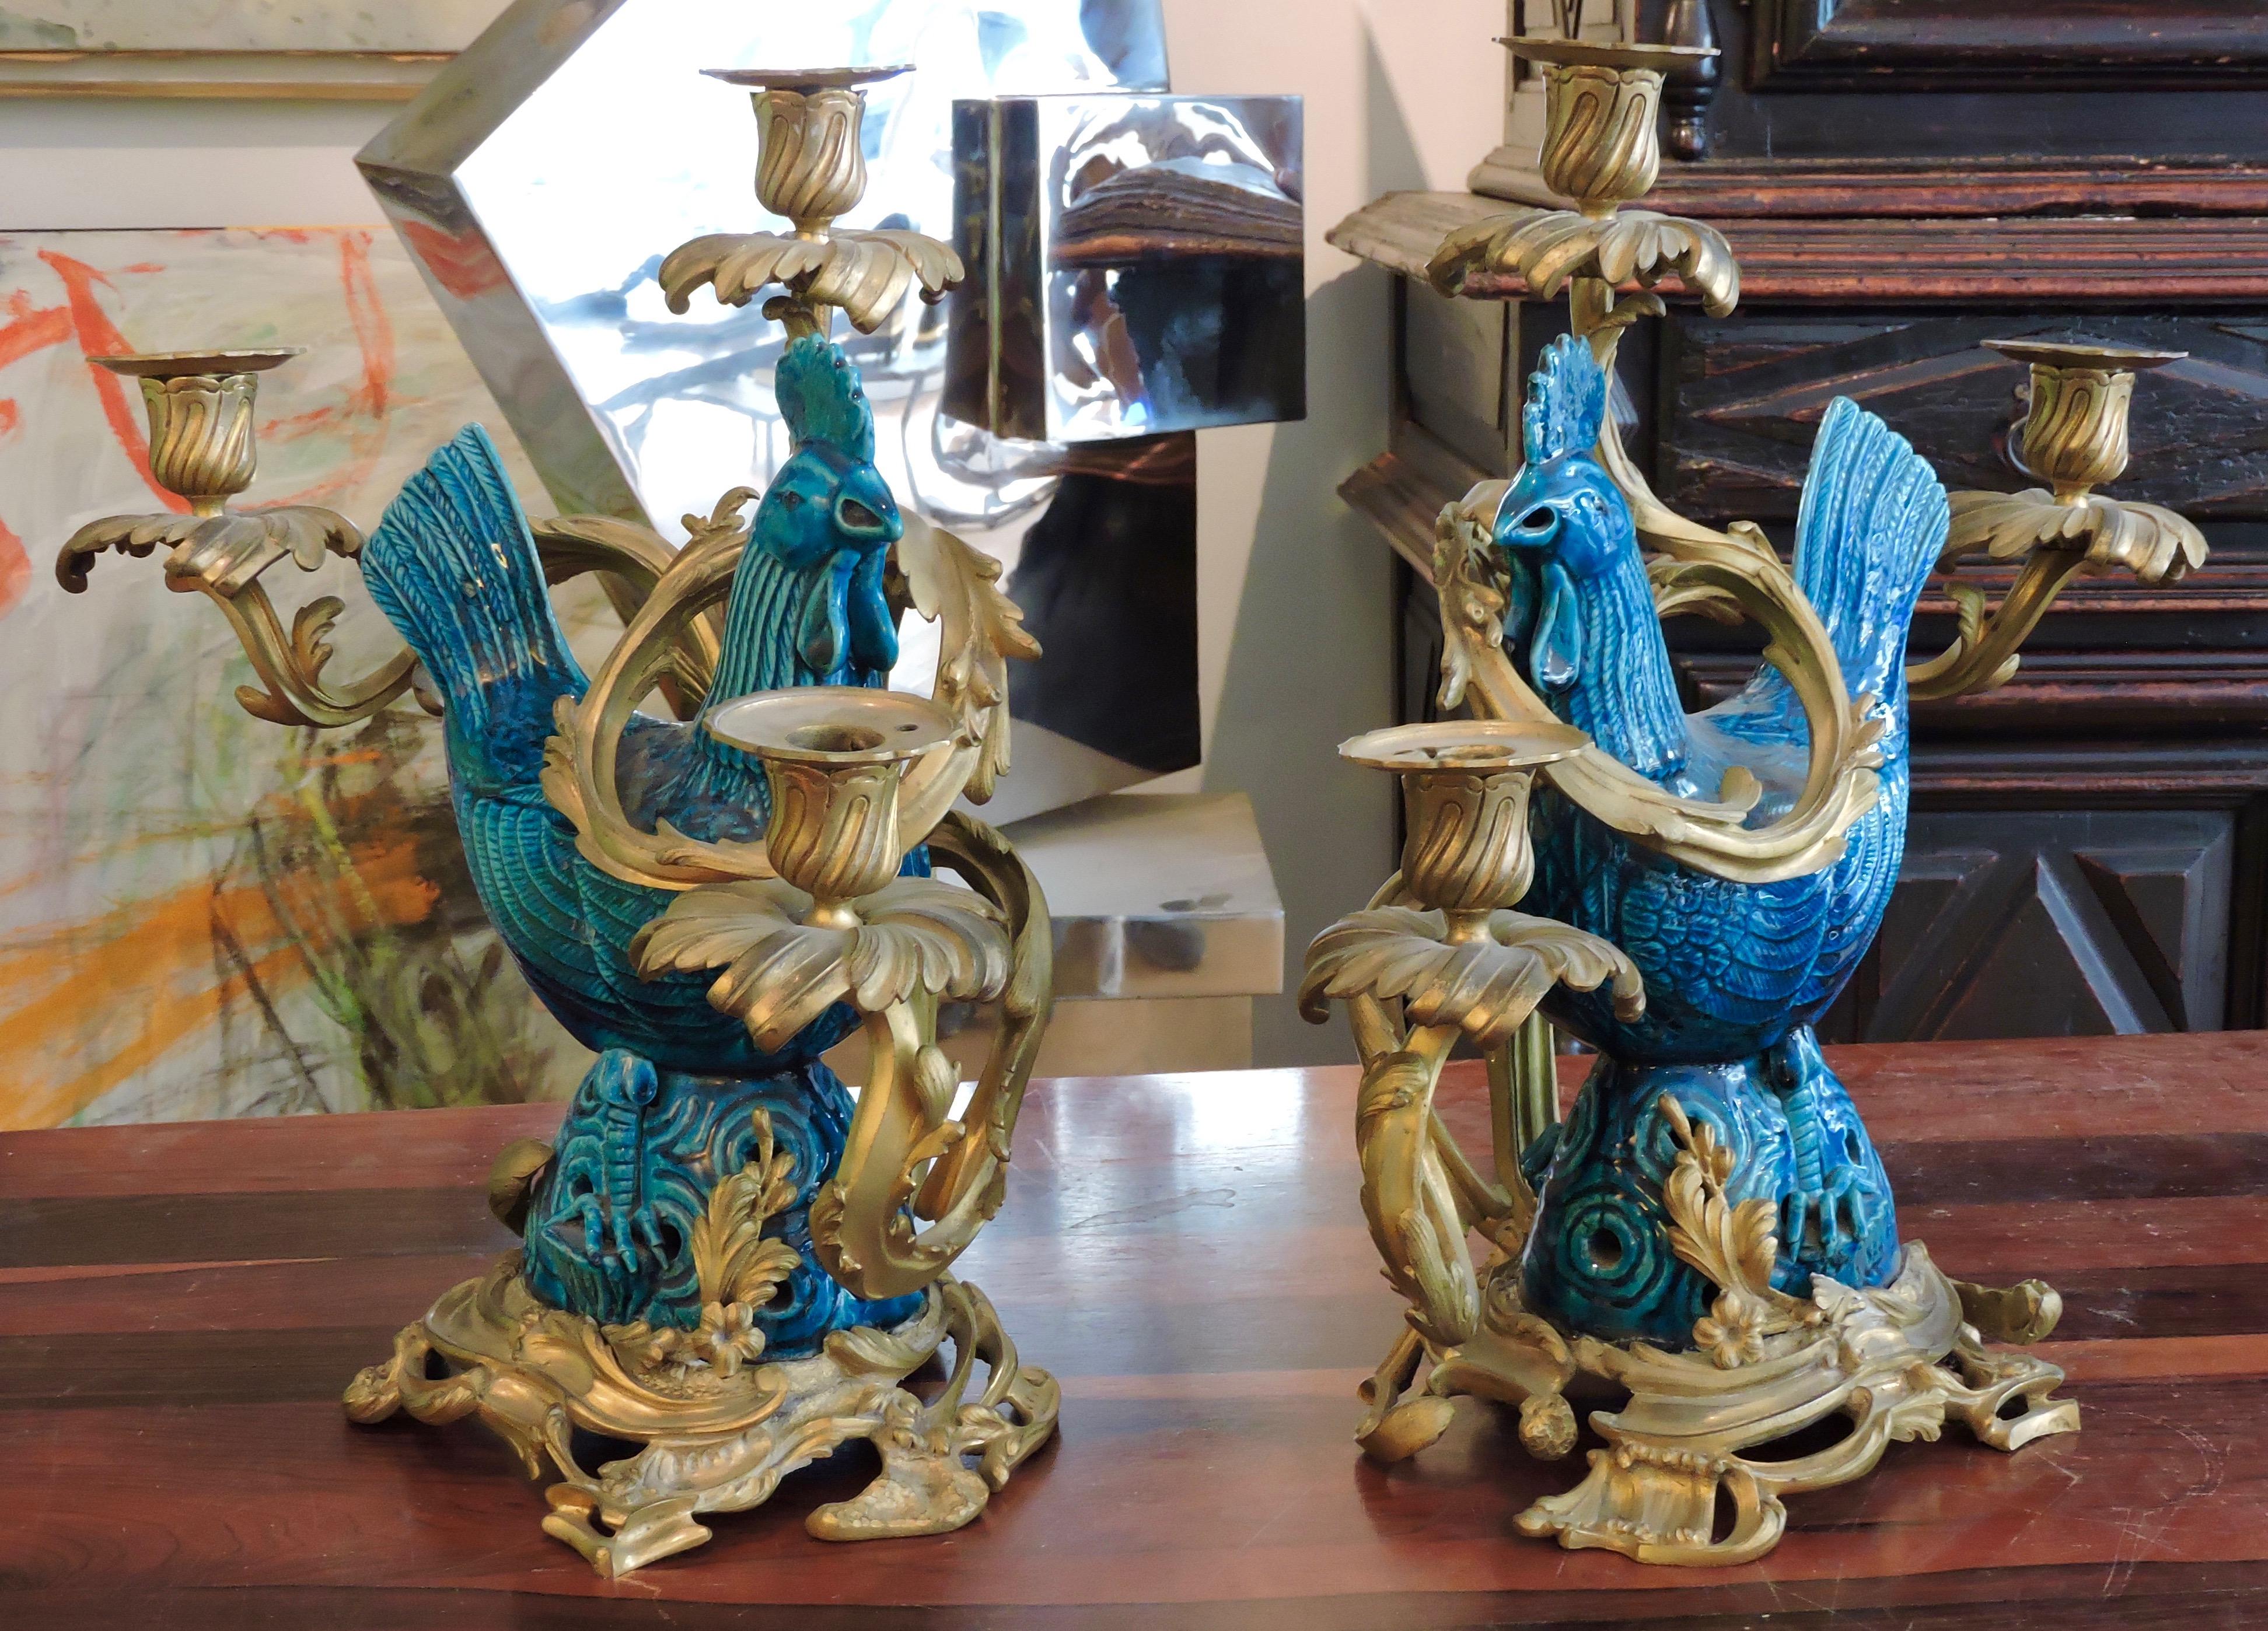 French 19th Century Pair of Blue Enameled Faience Roosters Ormolu-Mounted Candelabras